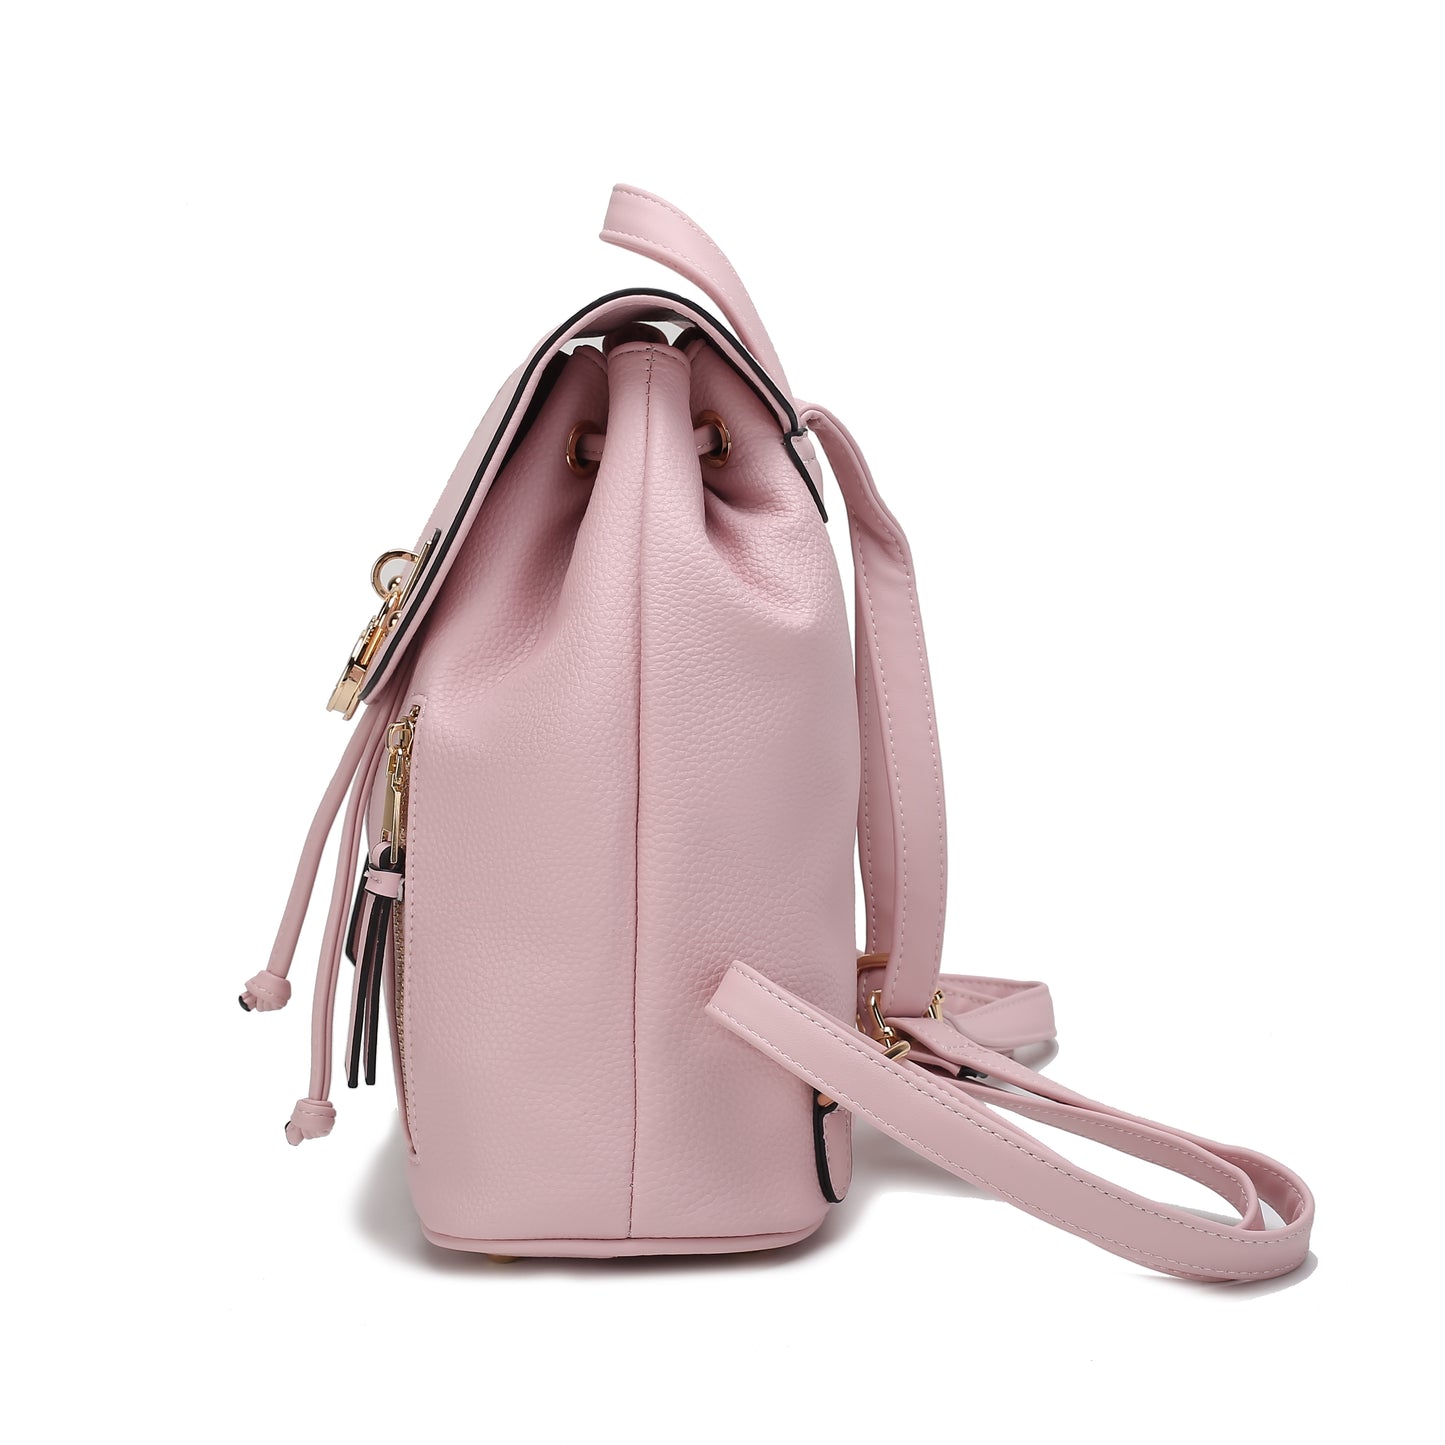 A Xandria Vegan Leather Women Backpack featuring a side zipper, made by Pink Orpheus.